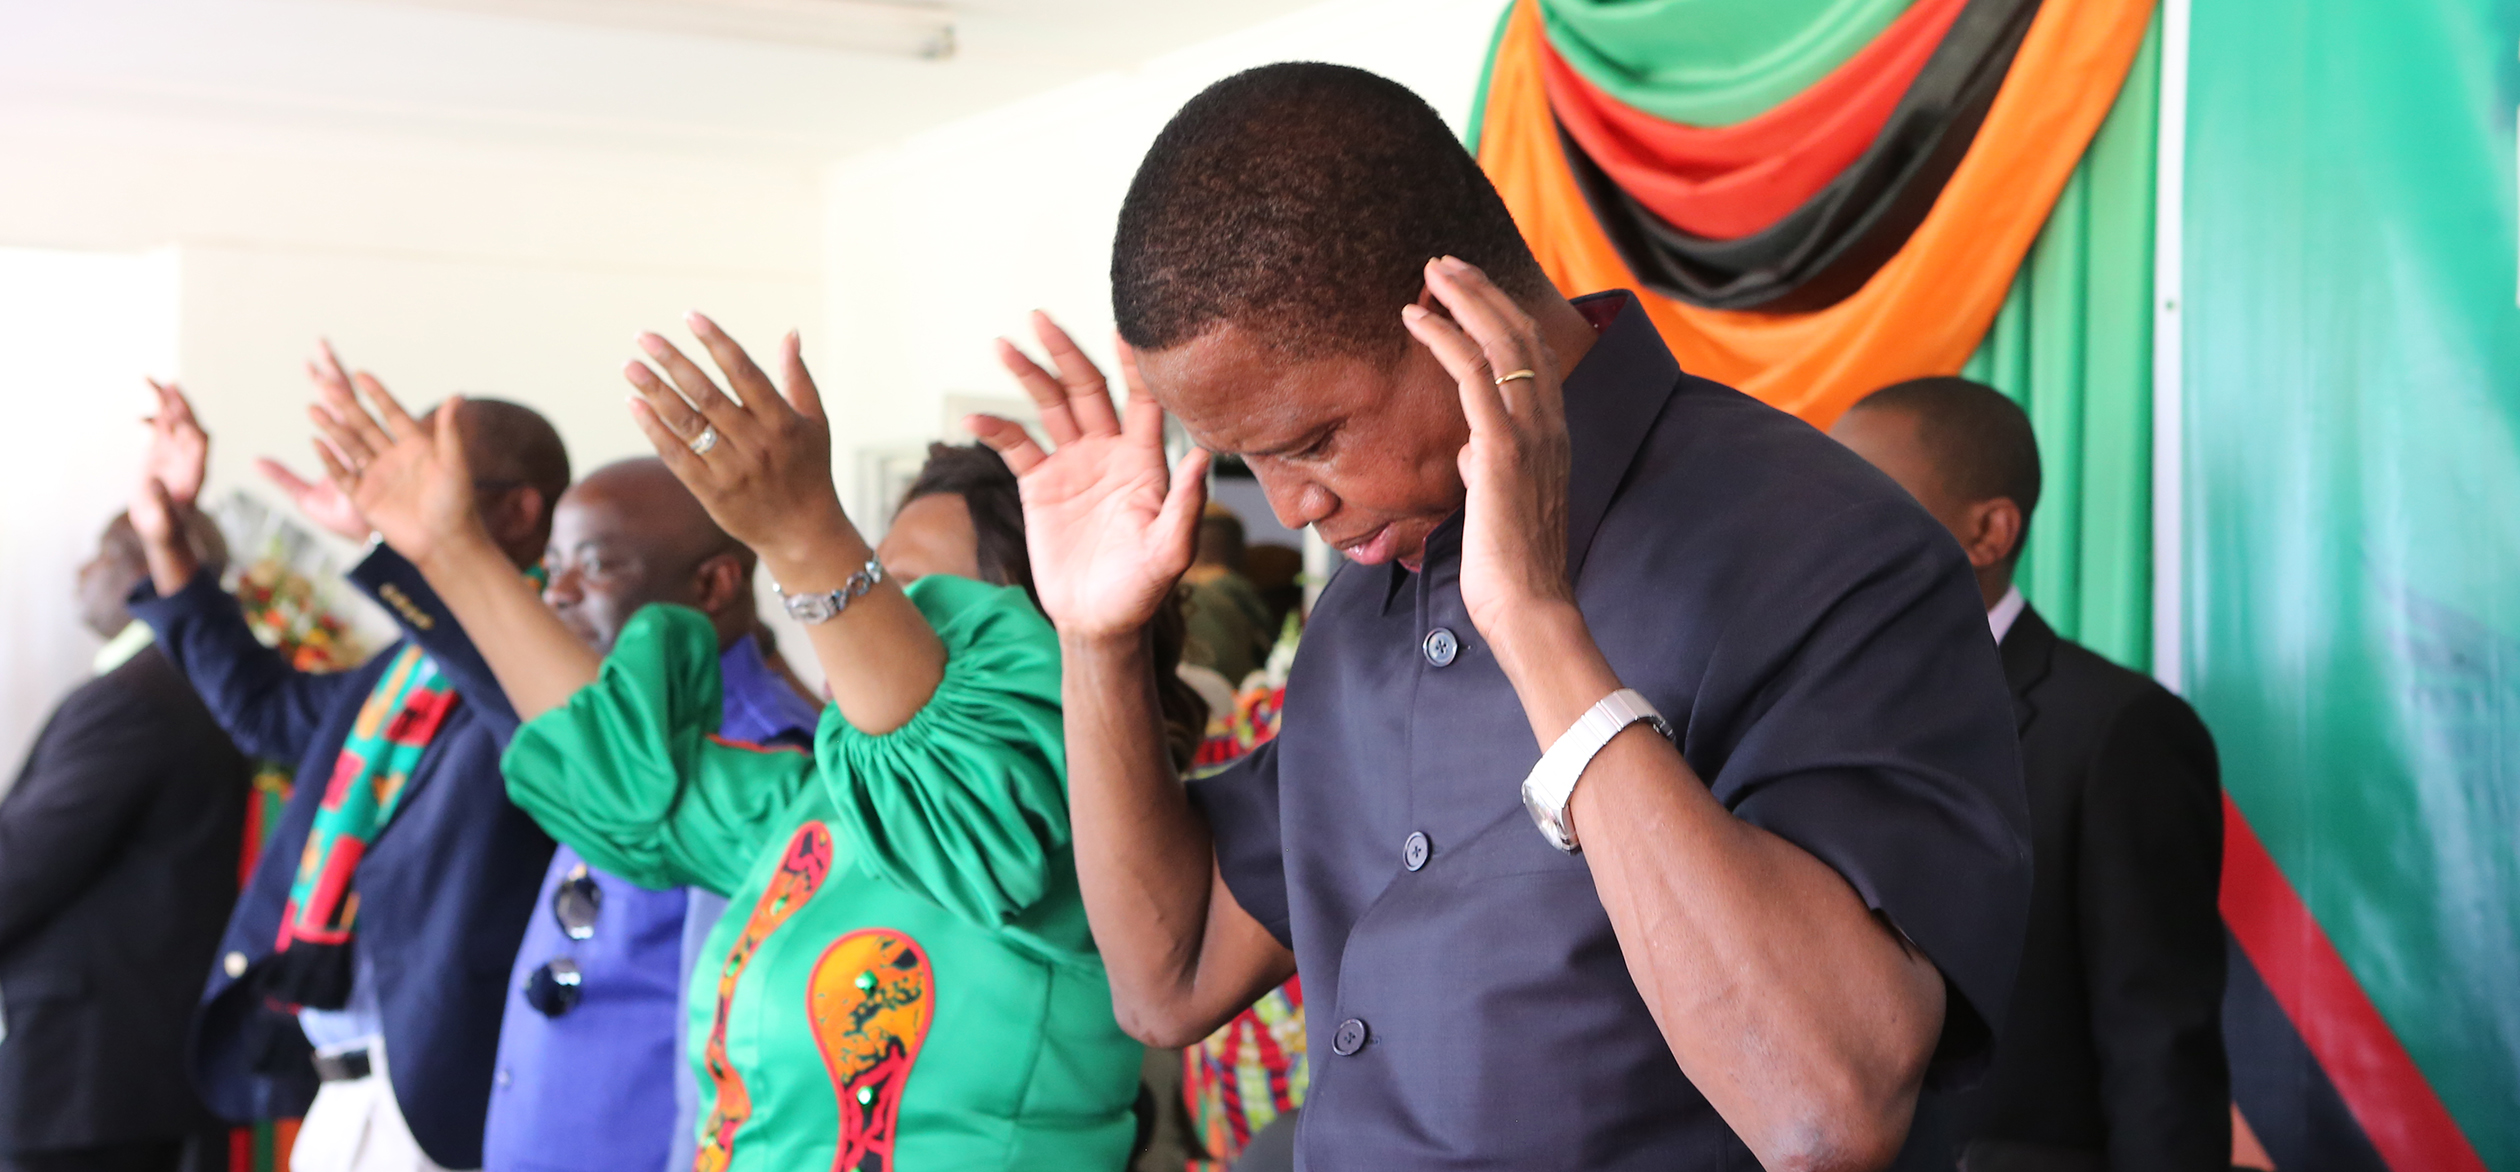 LETS PRAY FOR OUR BELOVED KK - LUNGU | Zambia Reports